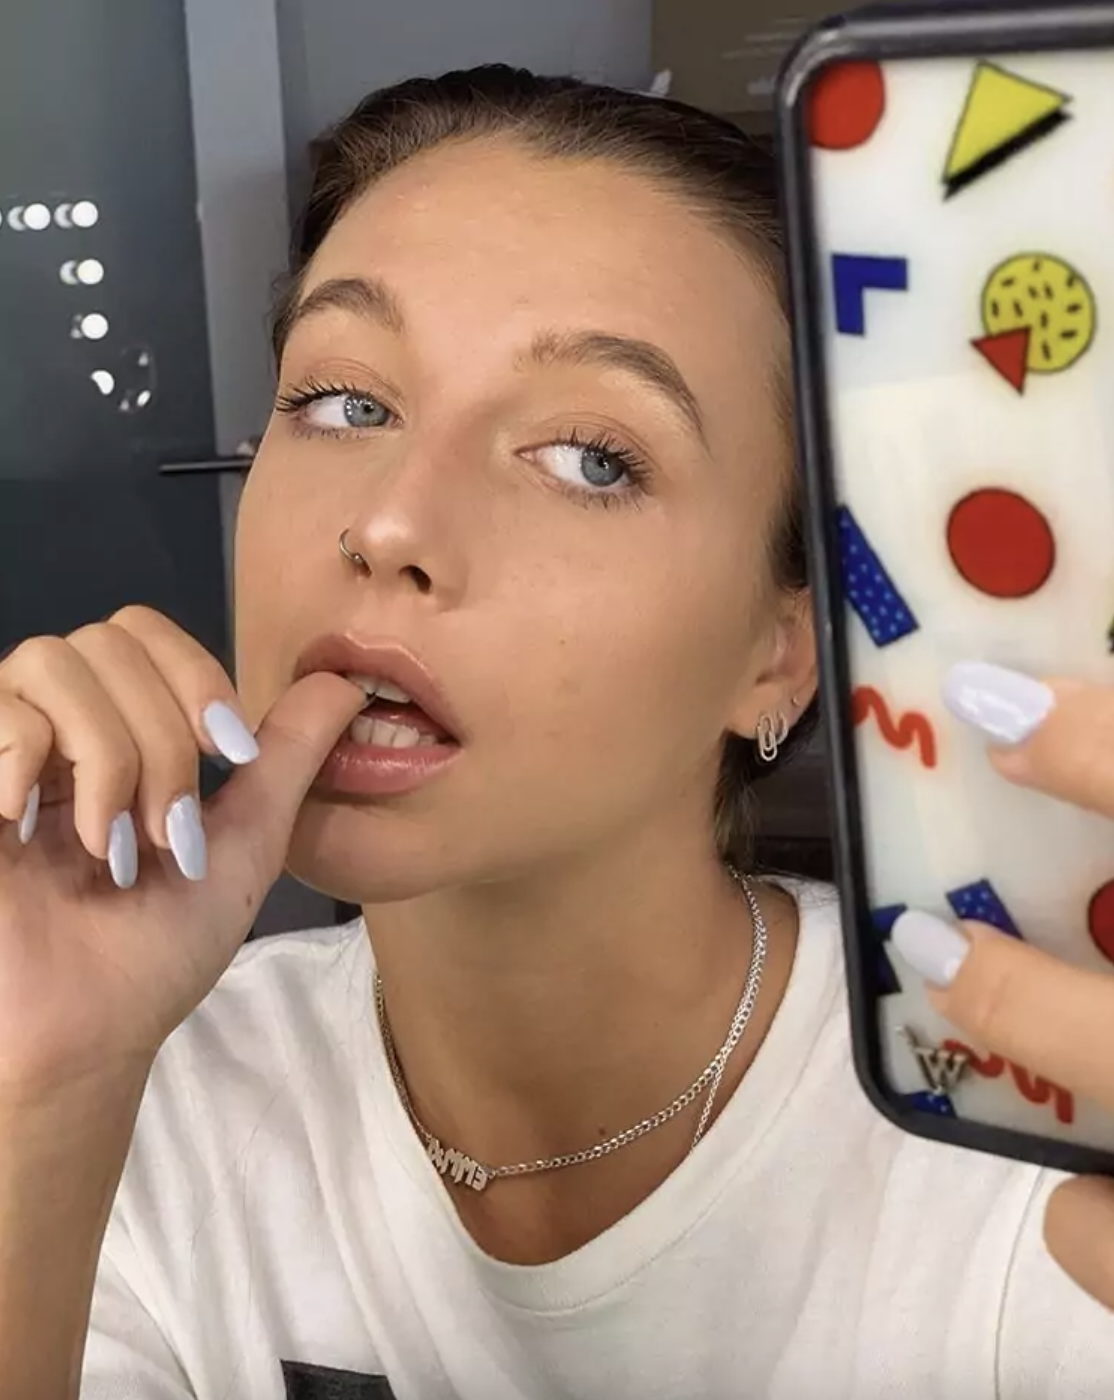 Emma Chamberlain's Pearl Bubble Nails are a Whimsical Twist on the